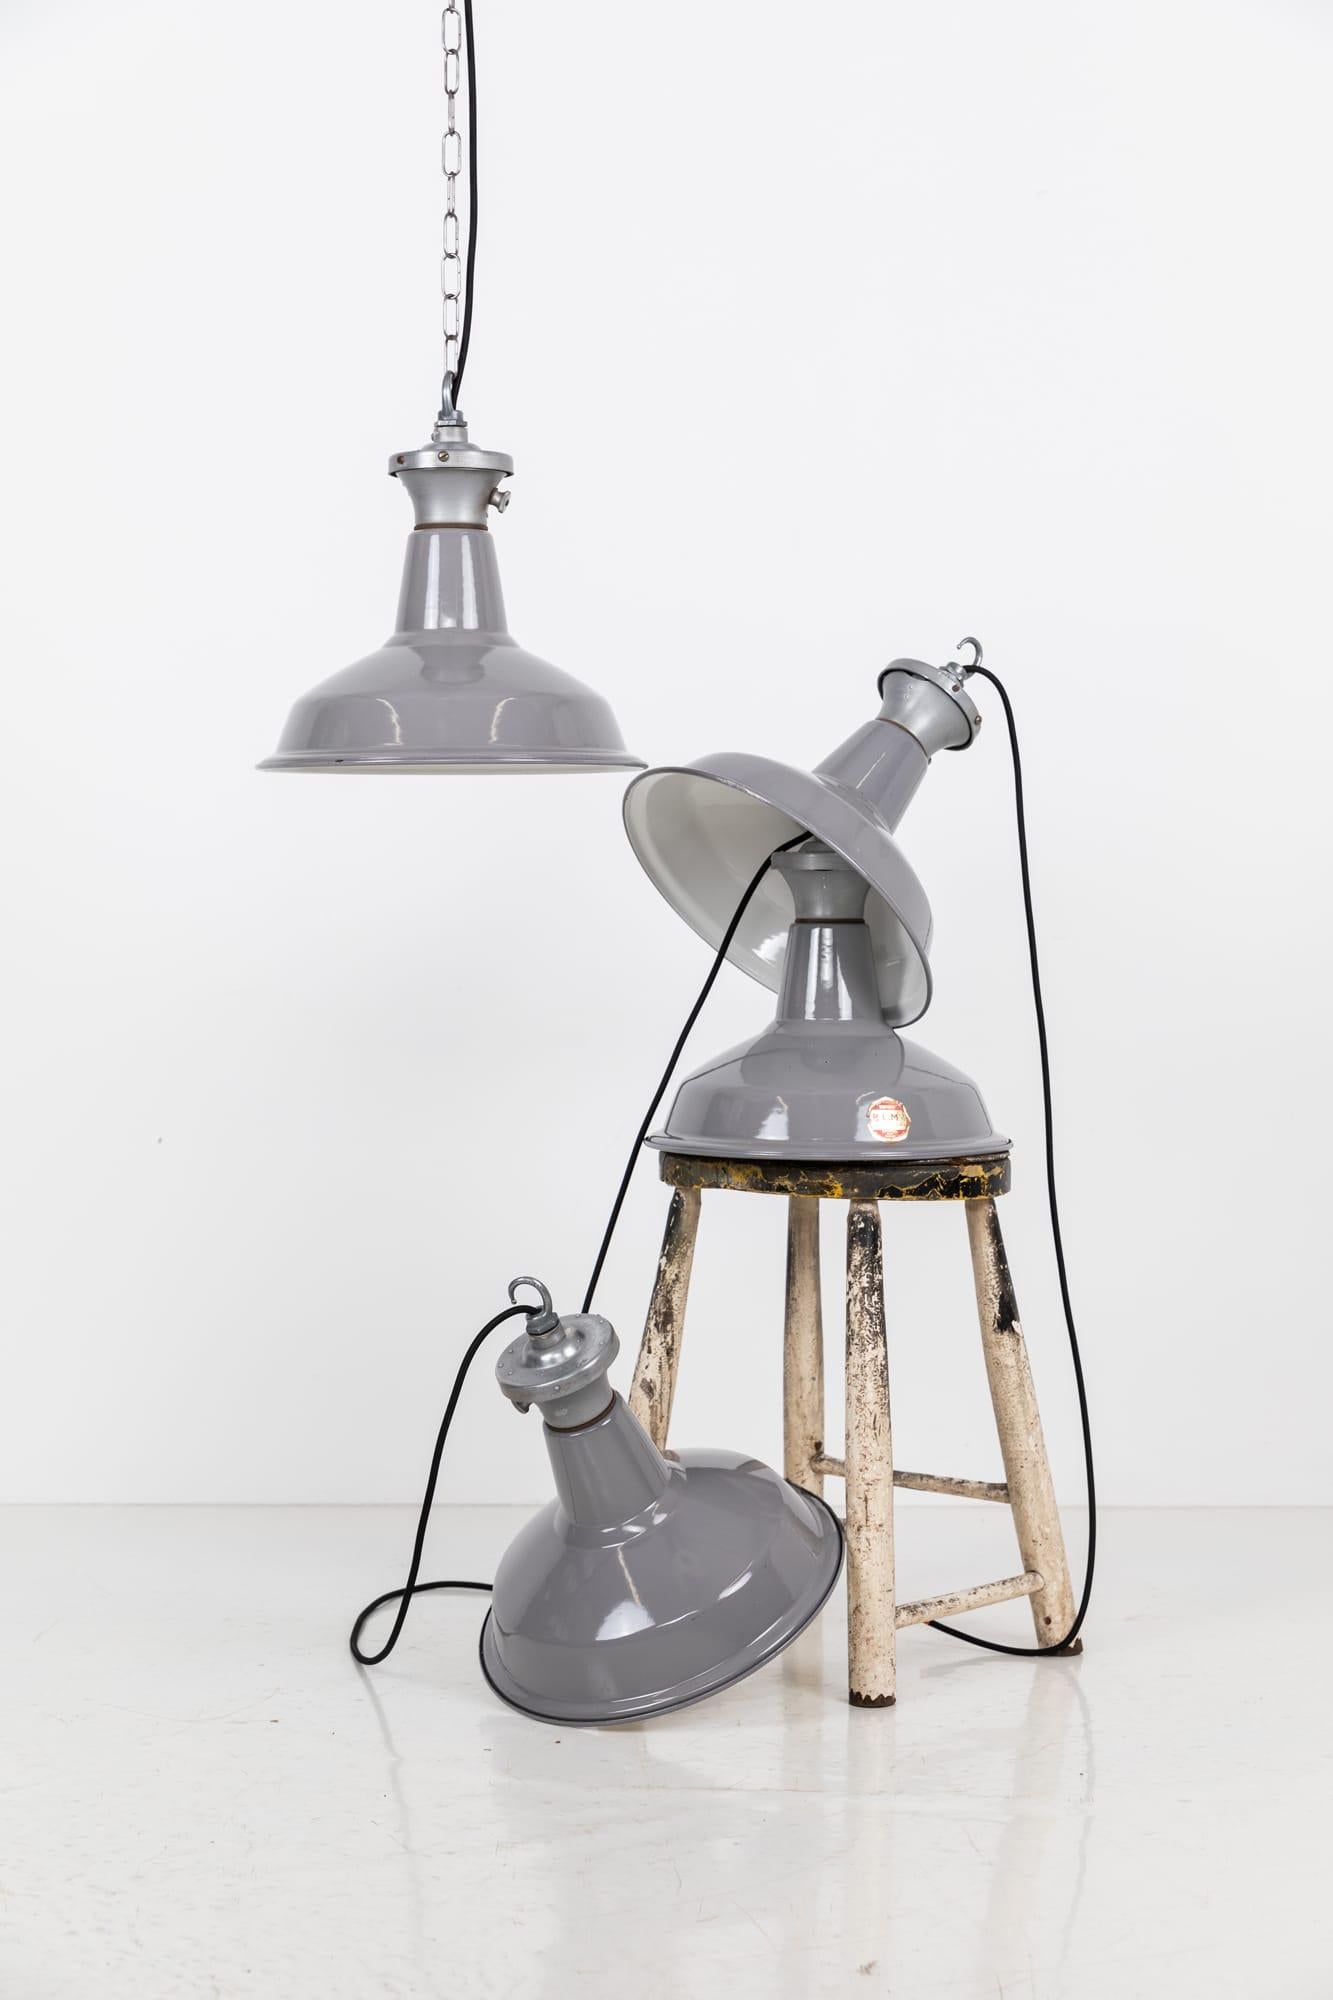 

Grey vitreous enameled pendant lights by renowned industrial manufactures Benjamin Electric. c.1930

In a smaller size than usually seen, surviving in amazing original condition, with very little wear to the enamel and remnants of the paper labels